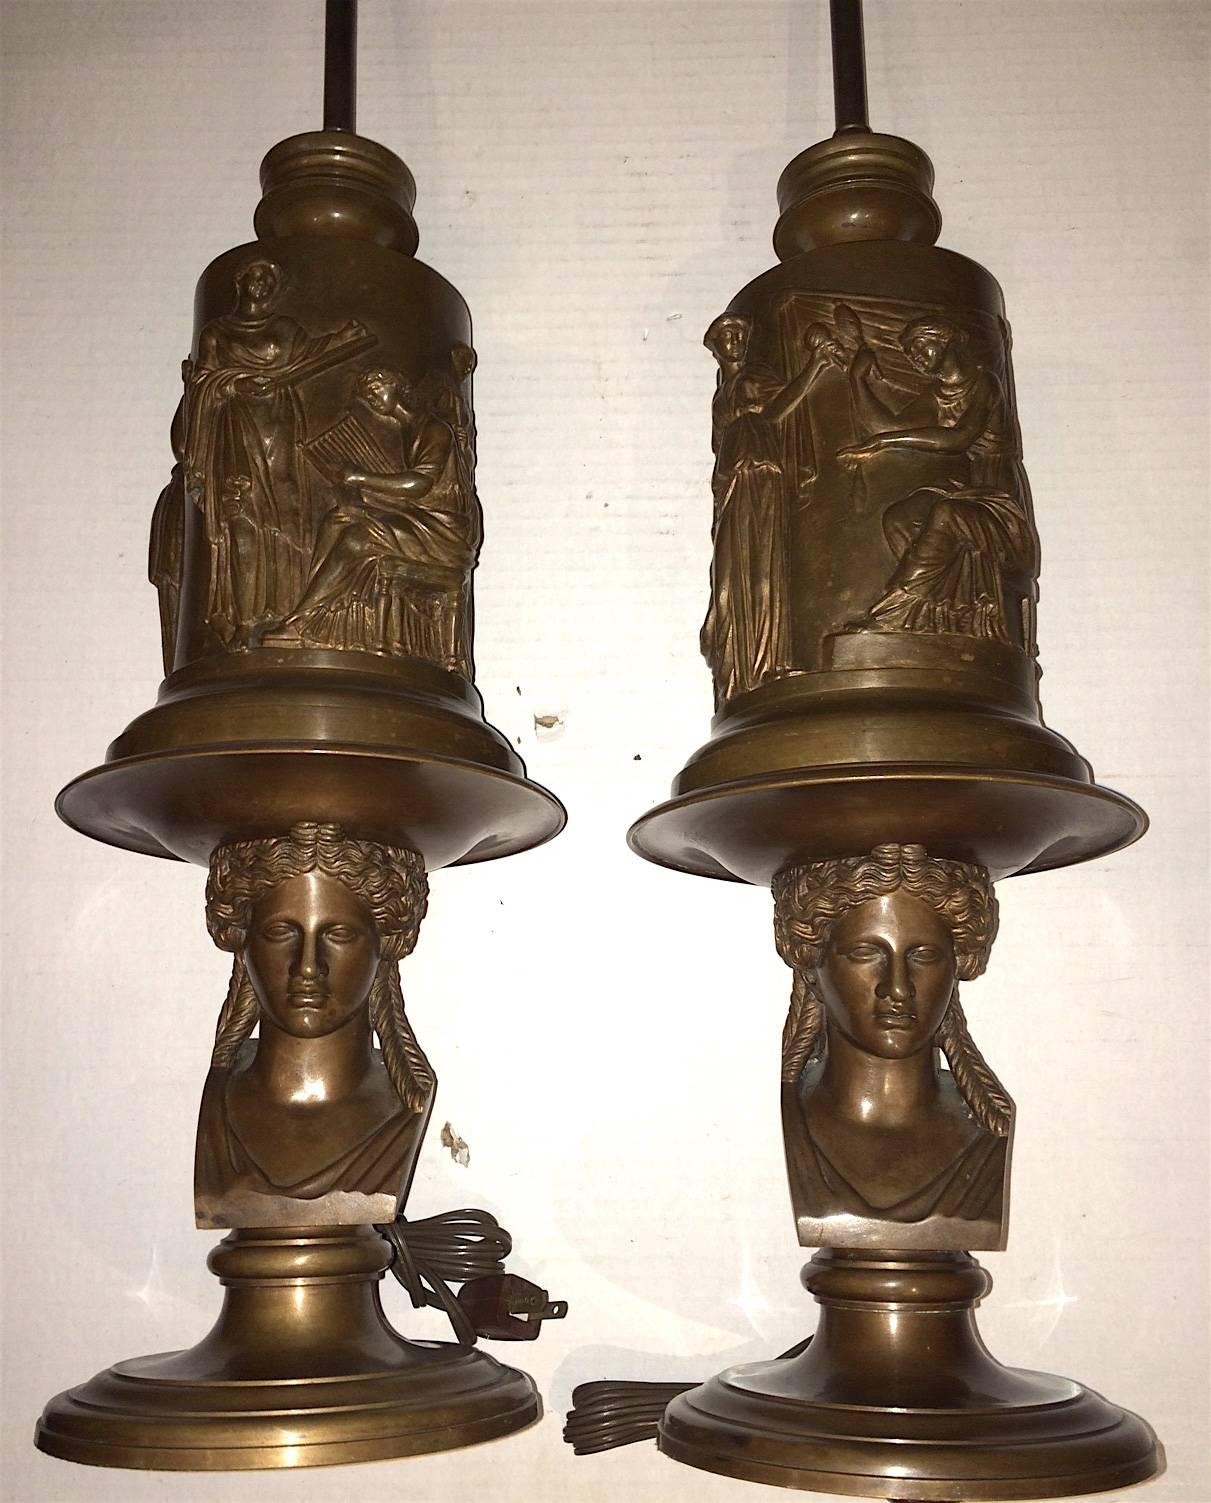 Pair of French, cast and patinated bronze table lamps with neoclassic scenes on body. Bust detail on base. Signed by Barbedienne.

Measures: 22